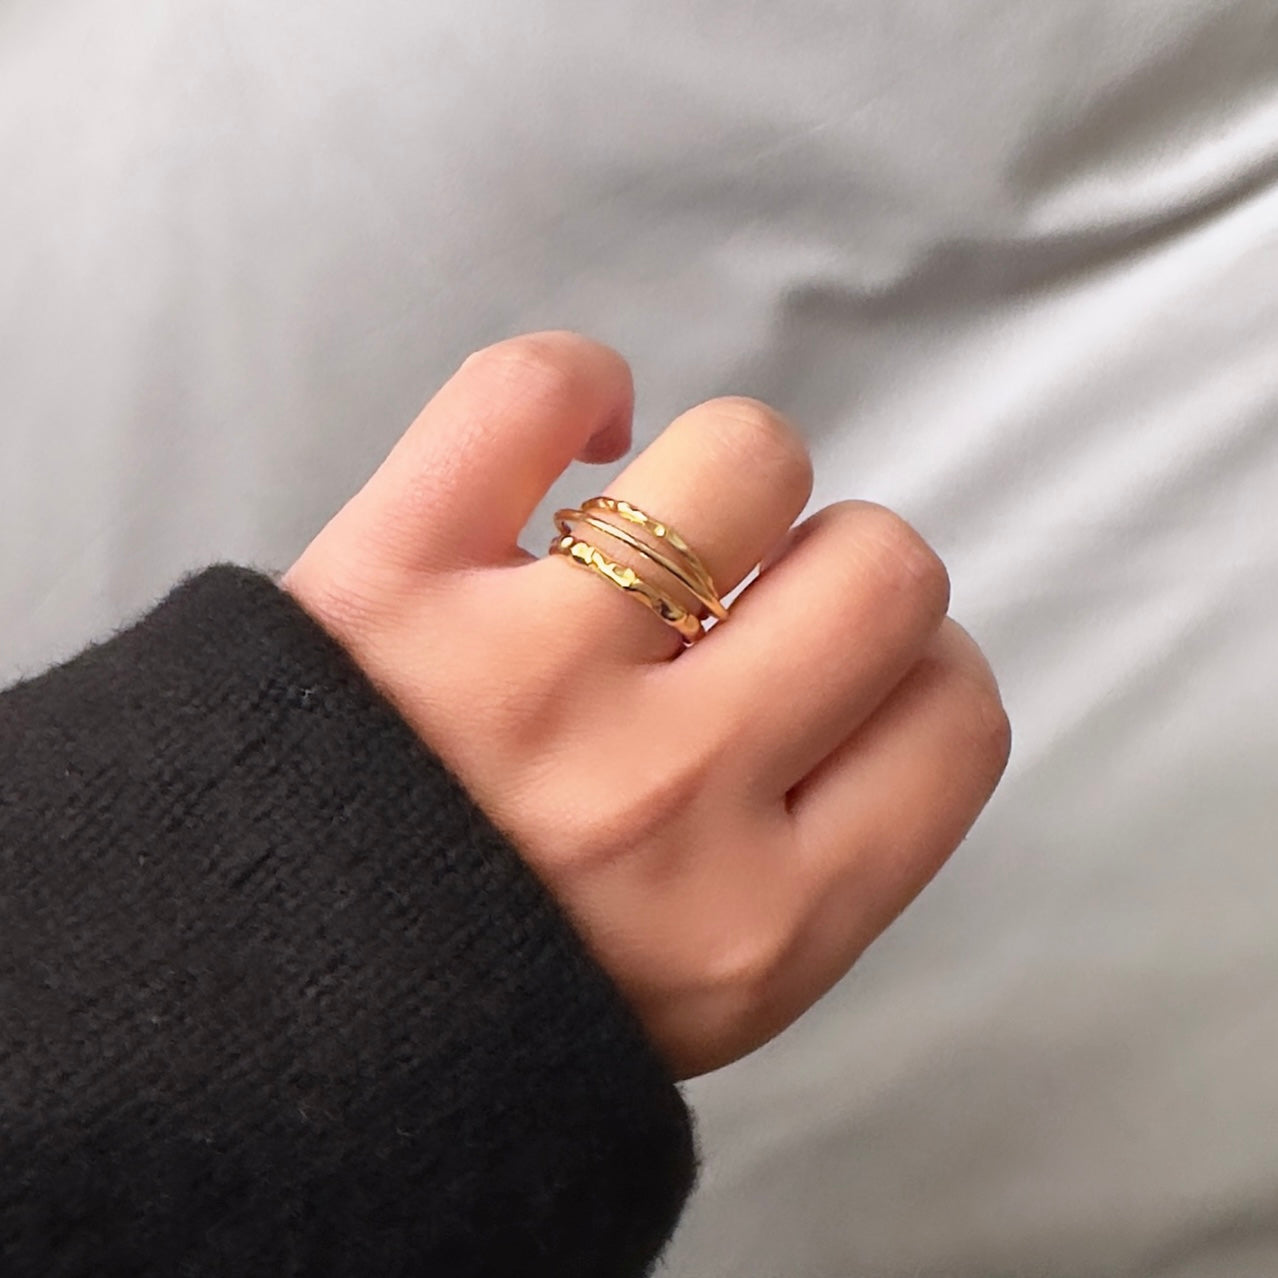 The Sasha Textured Ring is a sophisticated expression of modern minimalism. Crafted with three layers of 925 sterling silver, this adjustable ring is a timeless statement of elegance. Its subtle textured finish and adjustable size make this a perfect choice for the modern woman. Adjustable one size